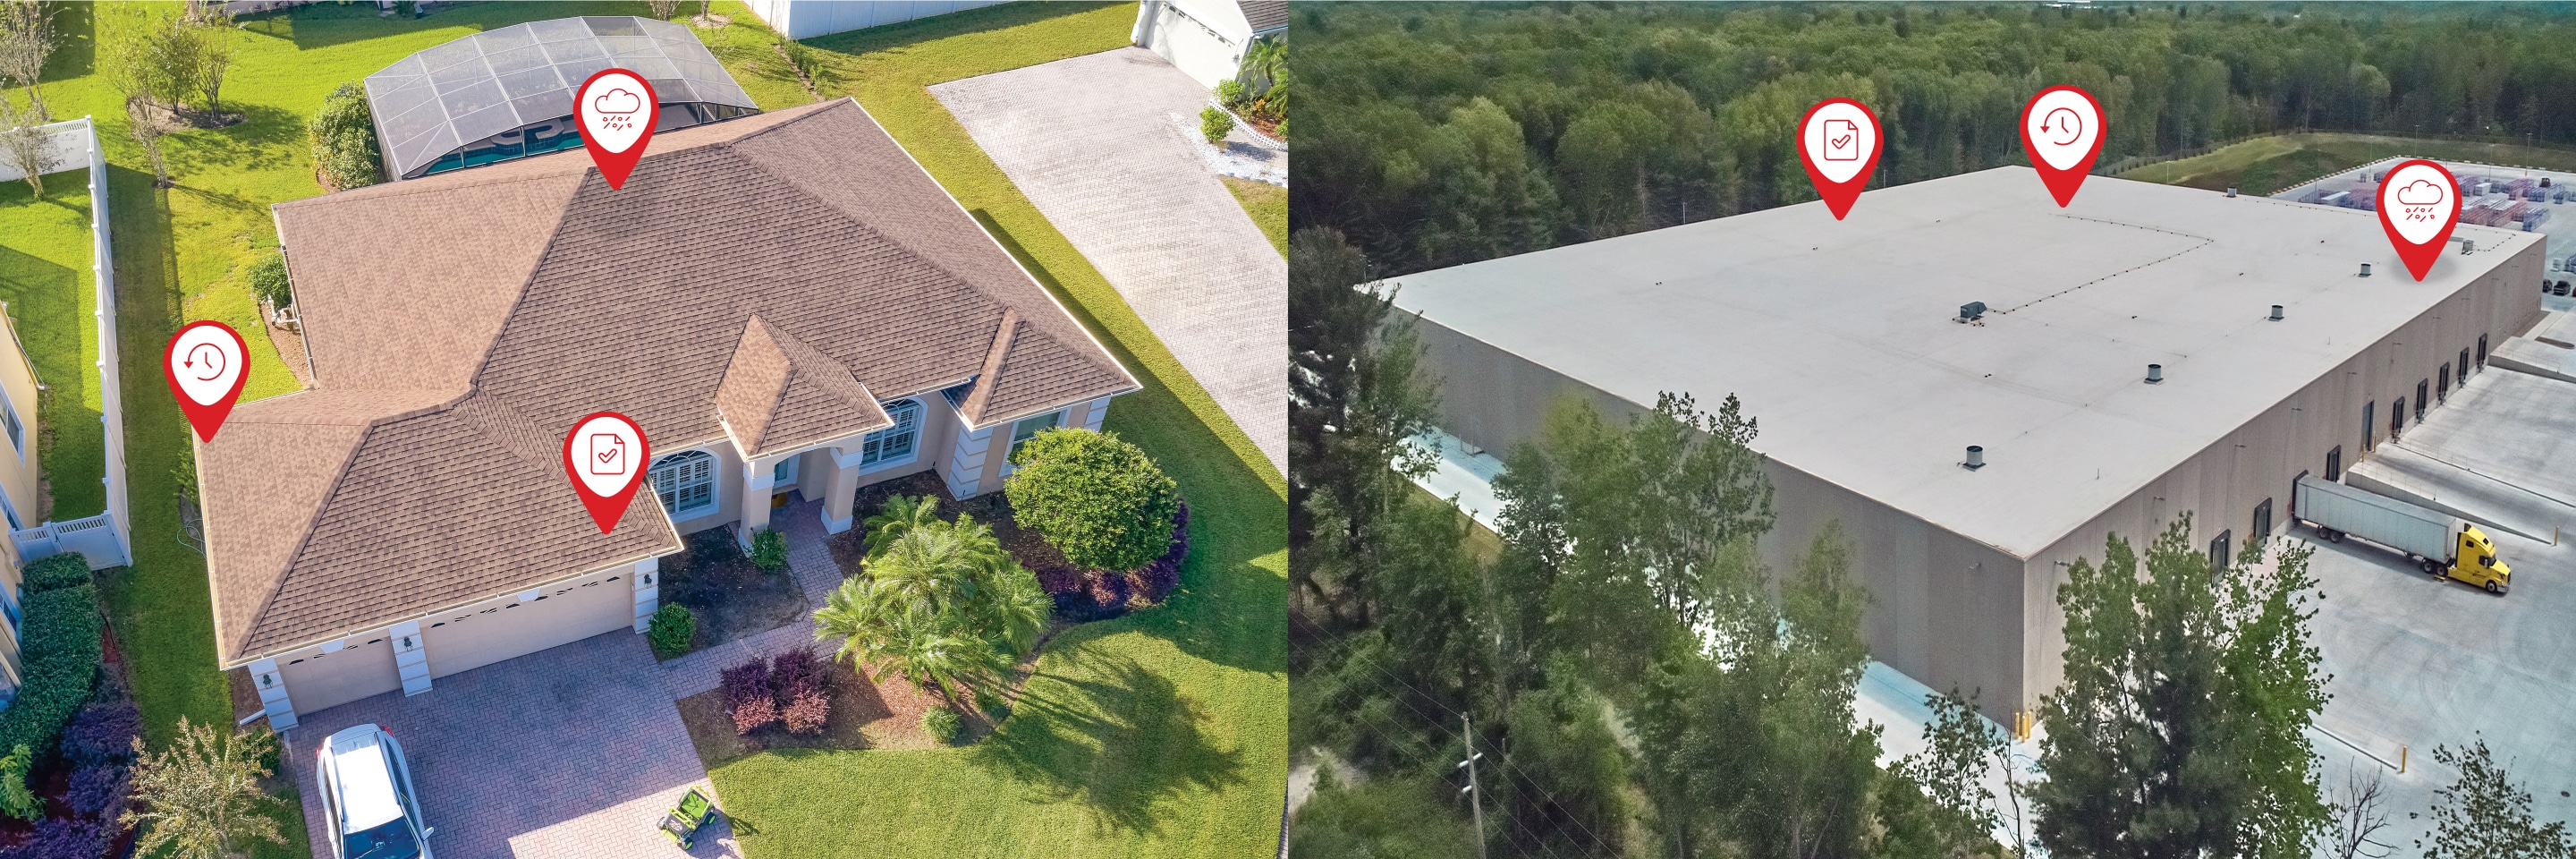 Aerial images of residential and commercial roofs with icons highlighting property data